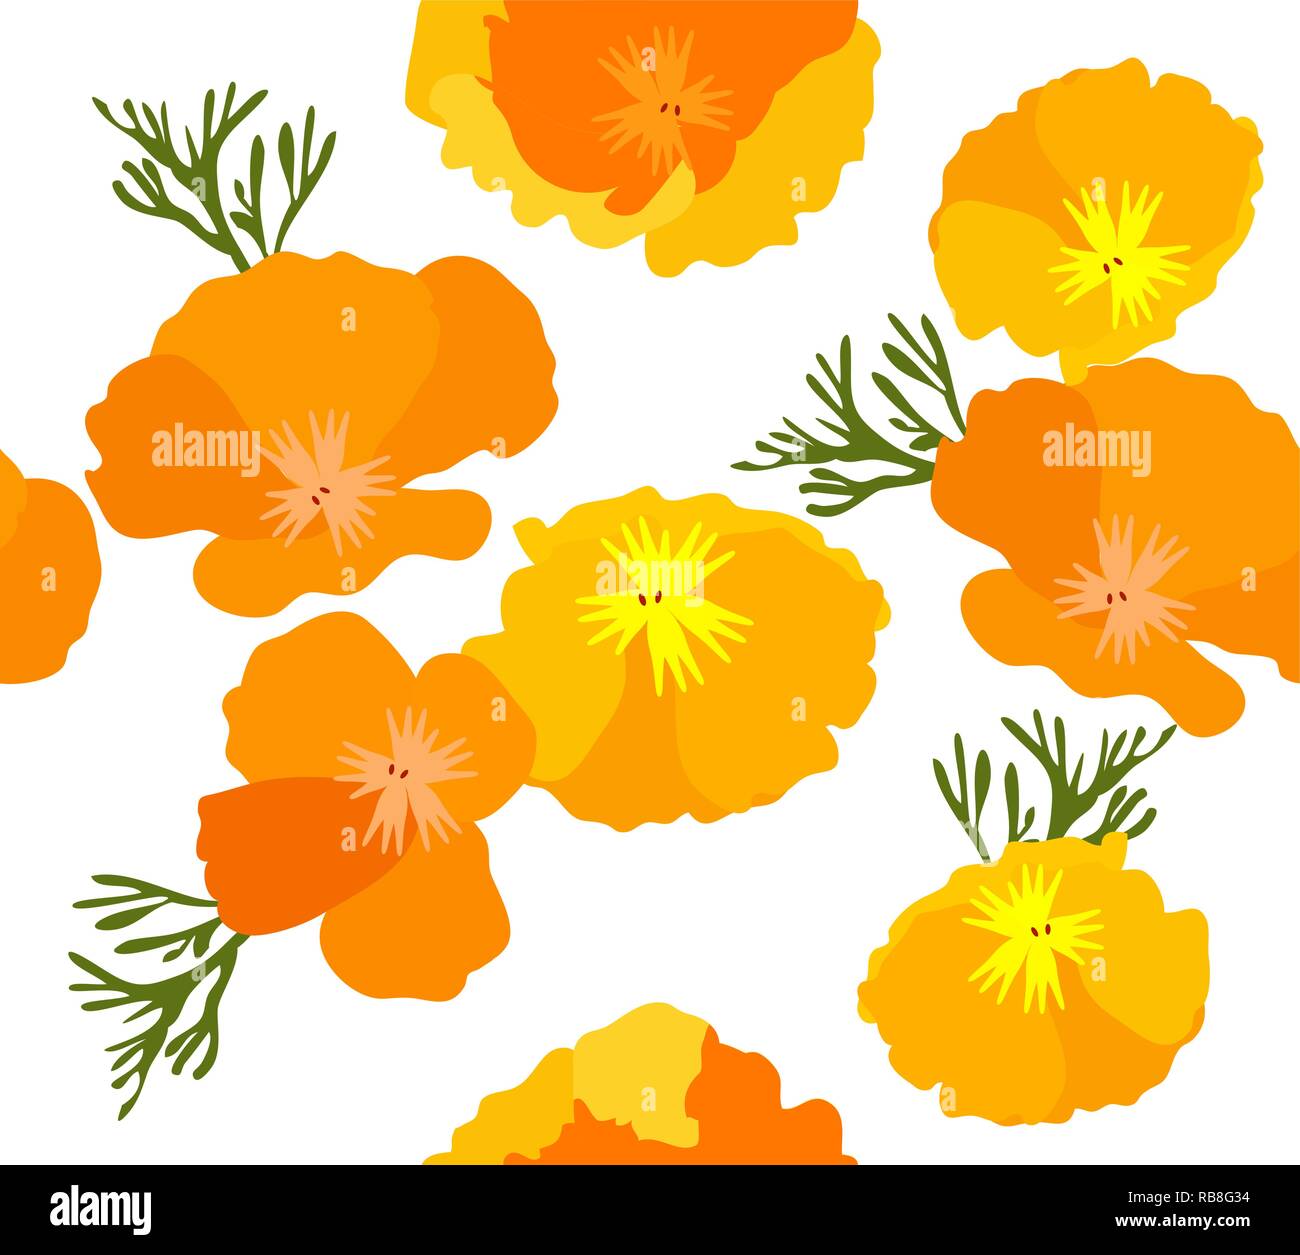 vector illustration of California state yellow and orange poppies. Stock Vector